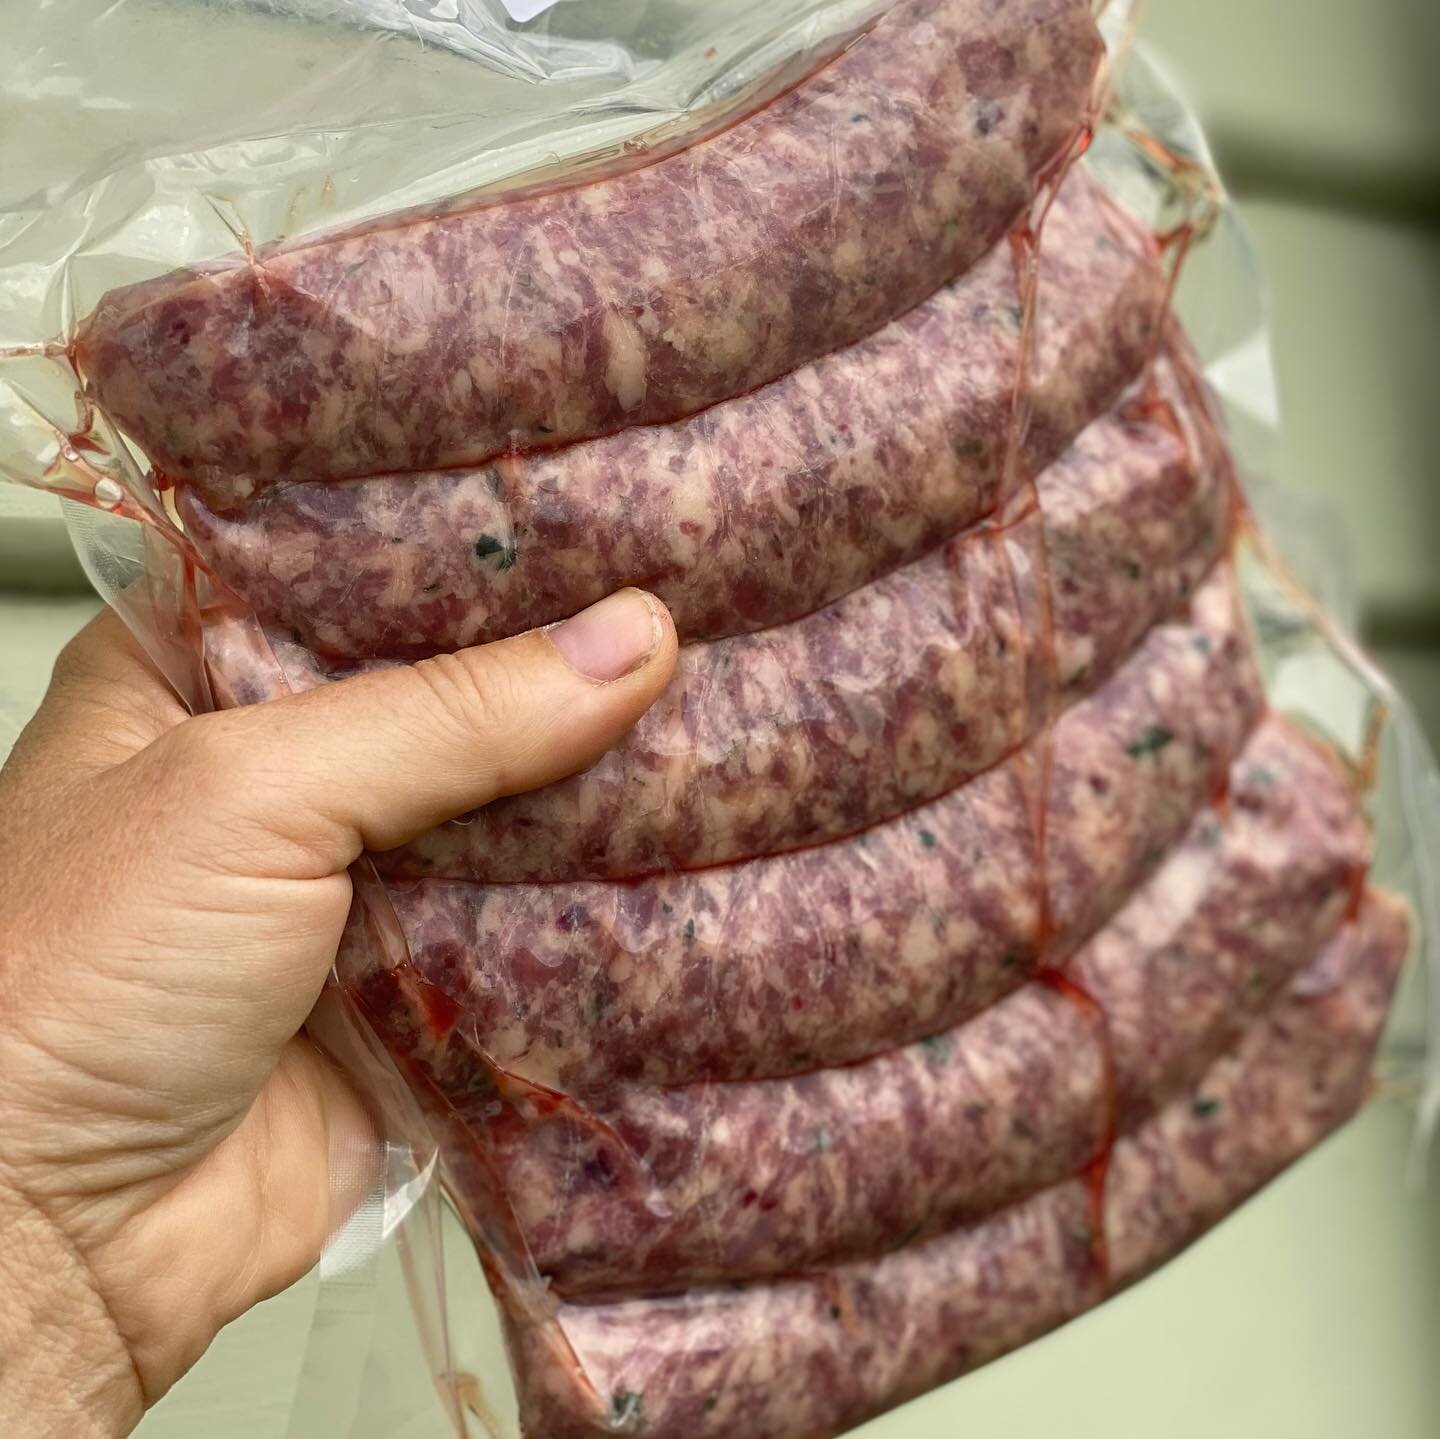 It&rsquo;s summer - and I don&rsquo;t know about you, but I&rsquo;ve got better things to do than spend time in the kitchen with these long days and warm weather! Sausages and salad are perfect for dinner - and our goat and beetroot snags, and Boerew